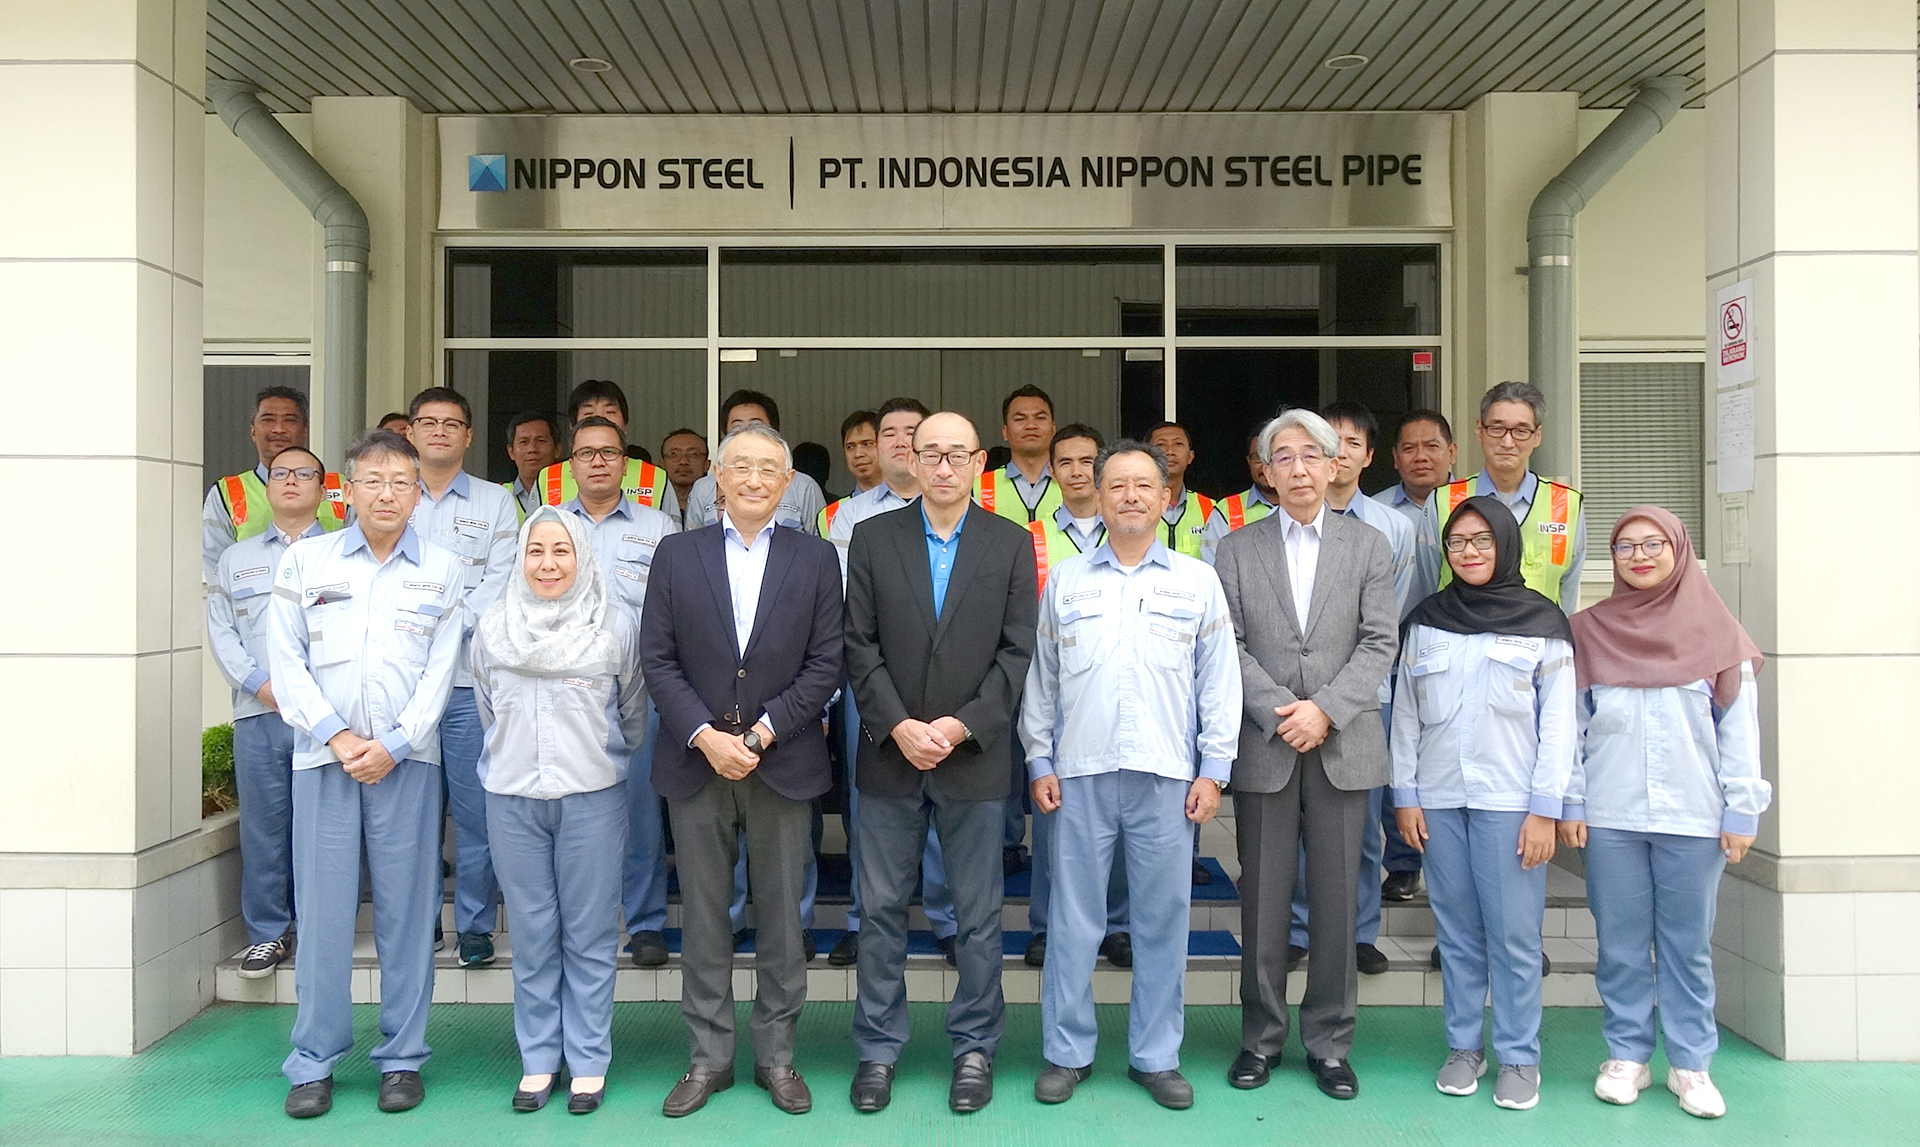 President Director of NSPC is visiting PT. Indonesia Nippon Steel Pipe